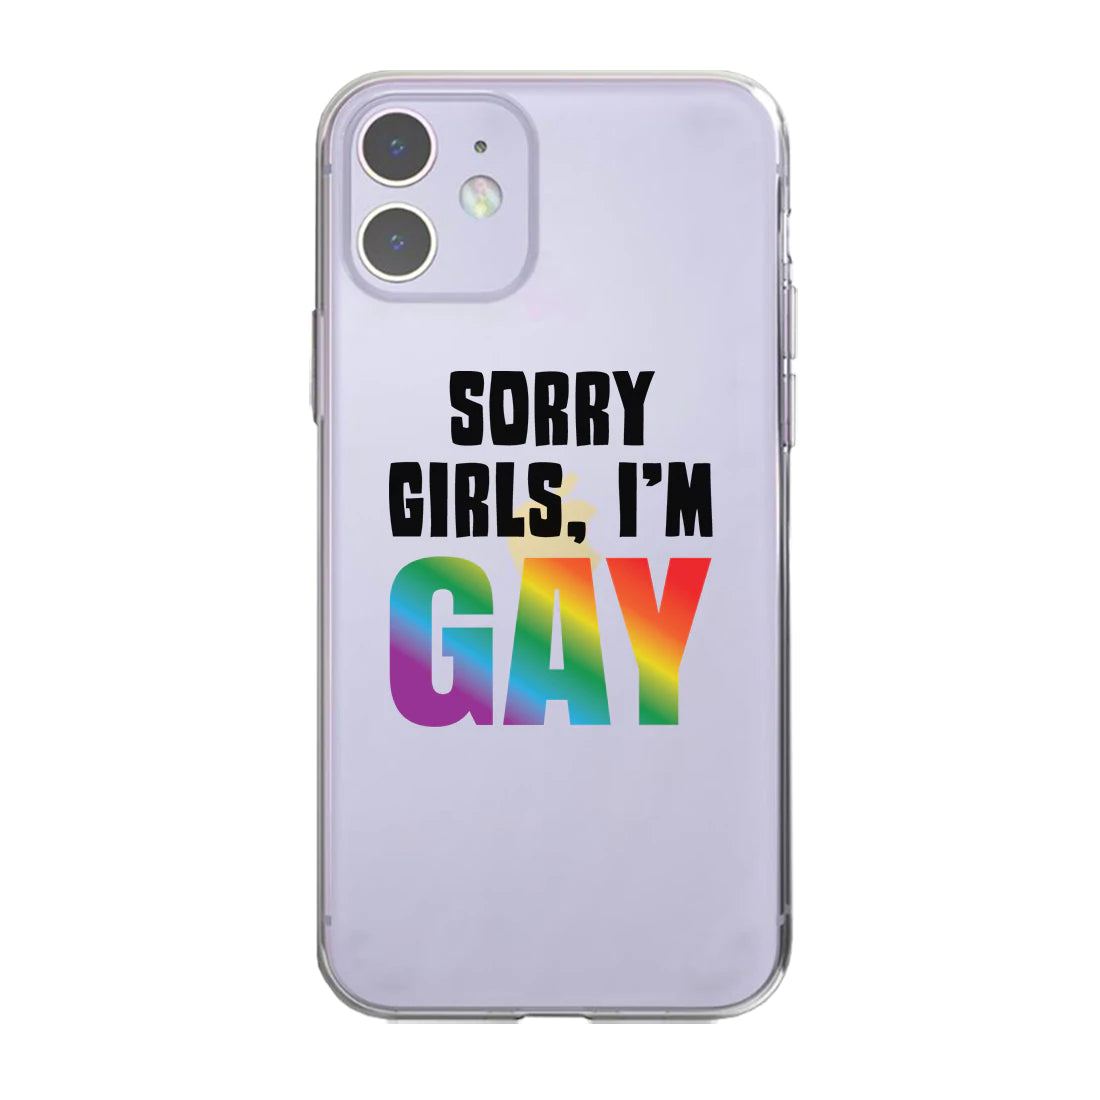 'Sorry Girls, I'm Gay' Phone Case - Gays+ Store